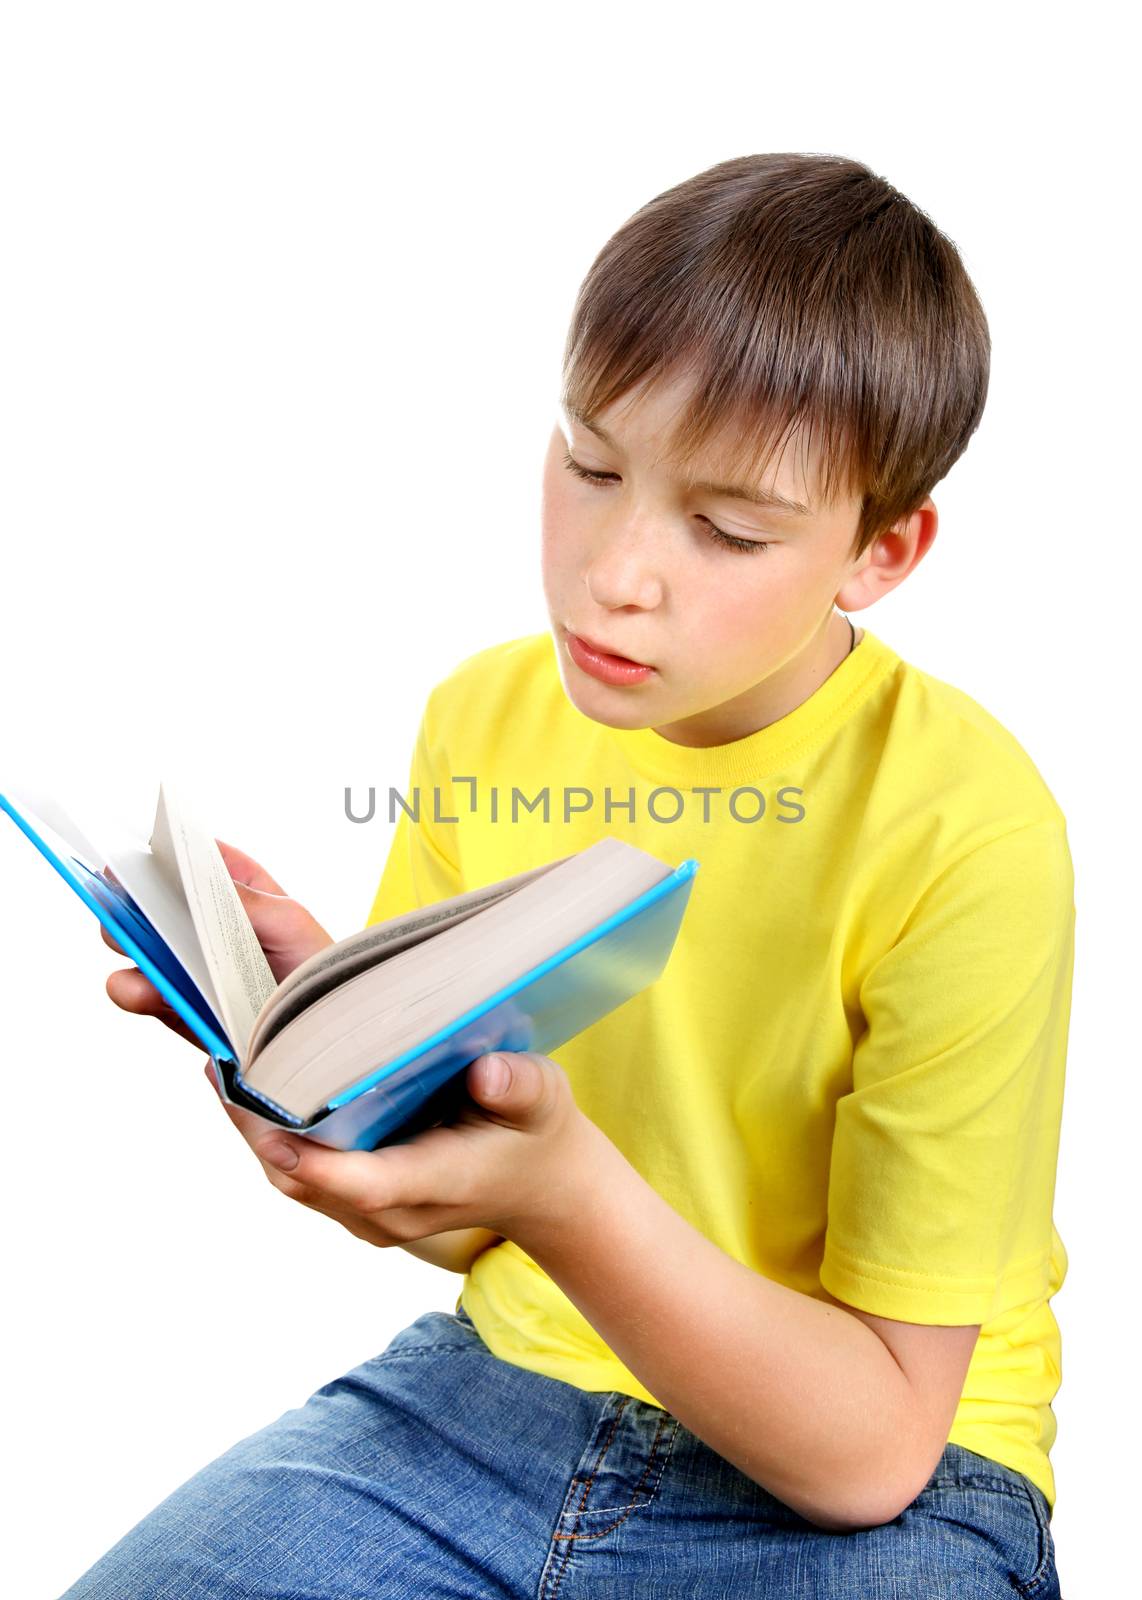 Kid with a Book Isolated on the White Background